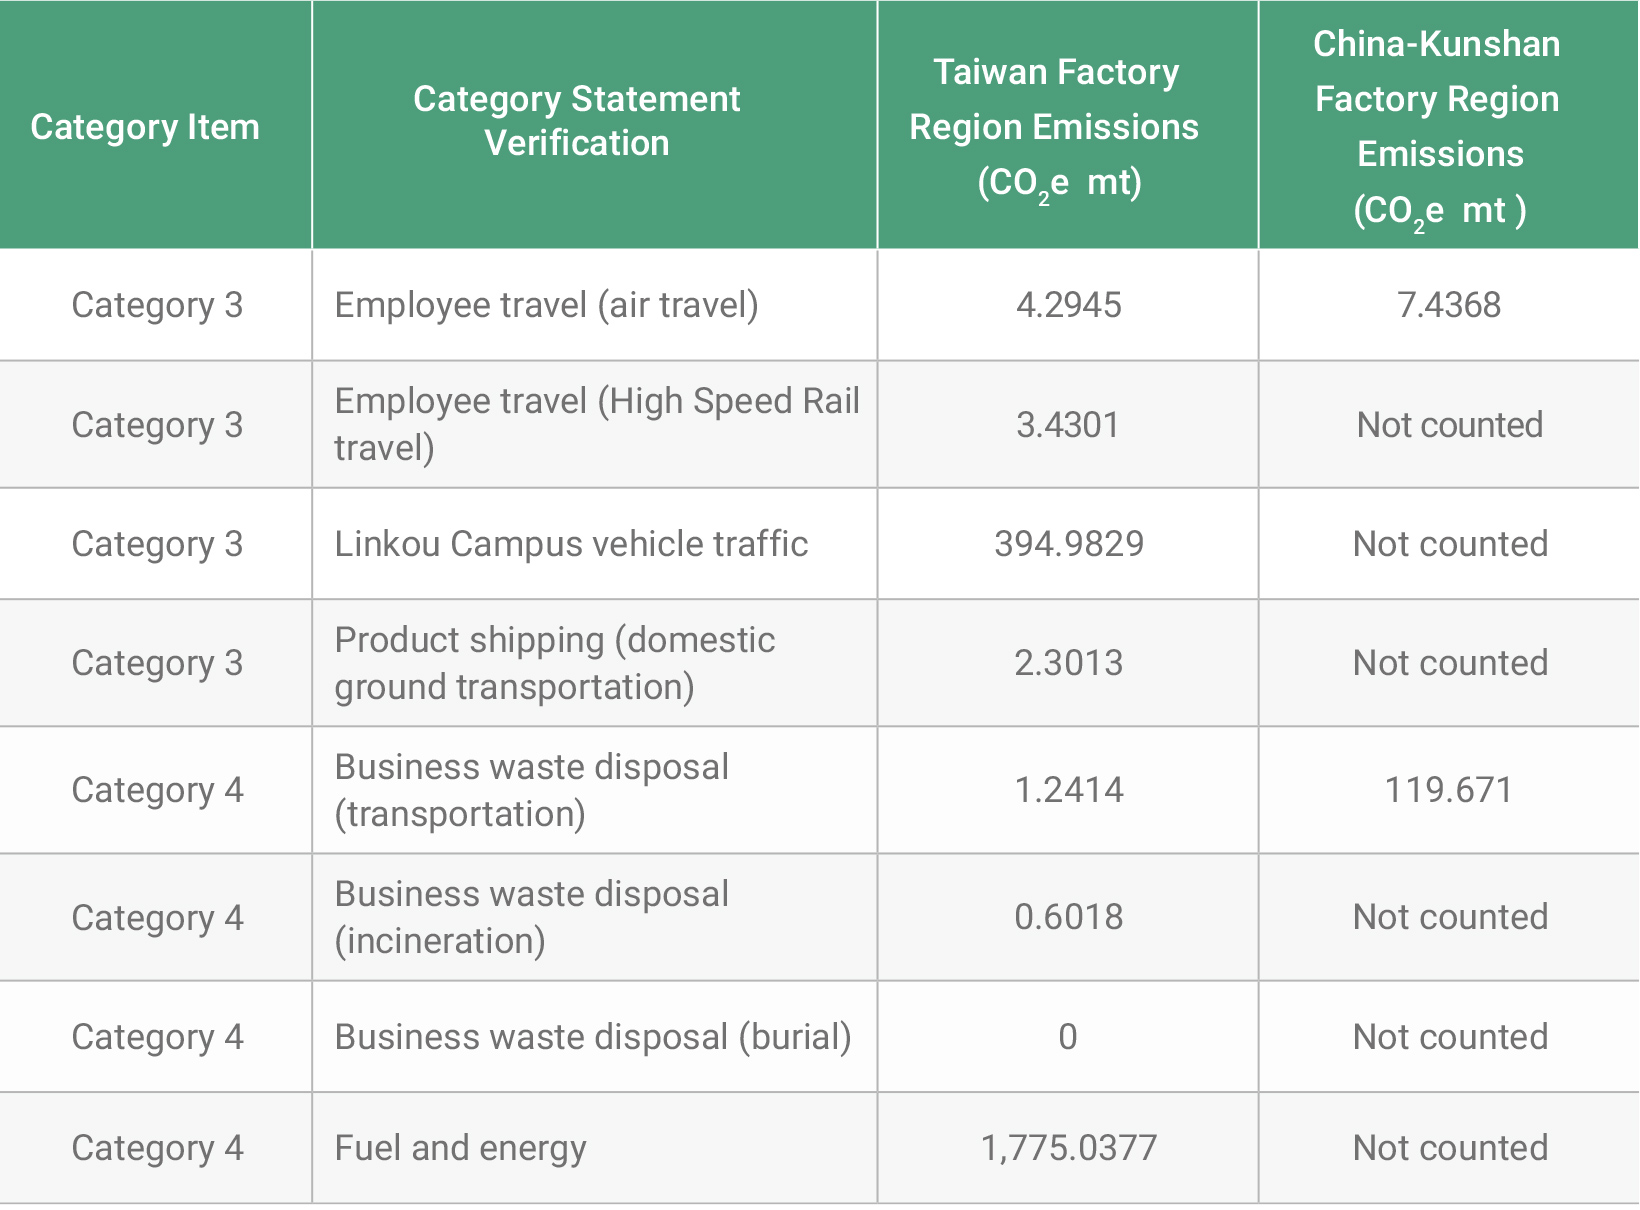  Identification and Emissions in GHG Categories 3 and 4 for Advantech Taiwan and Kunshan